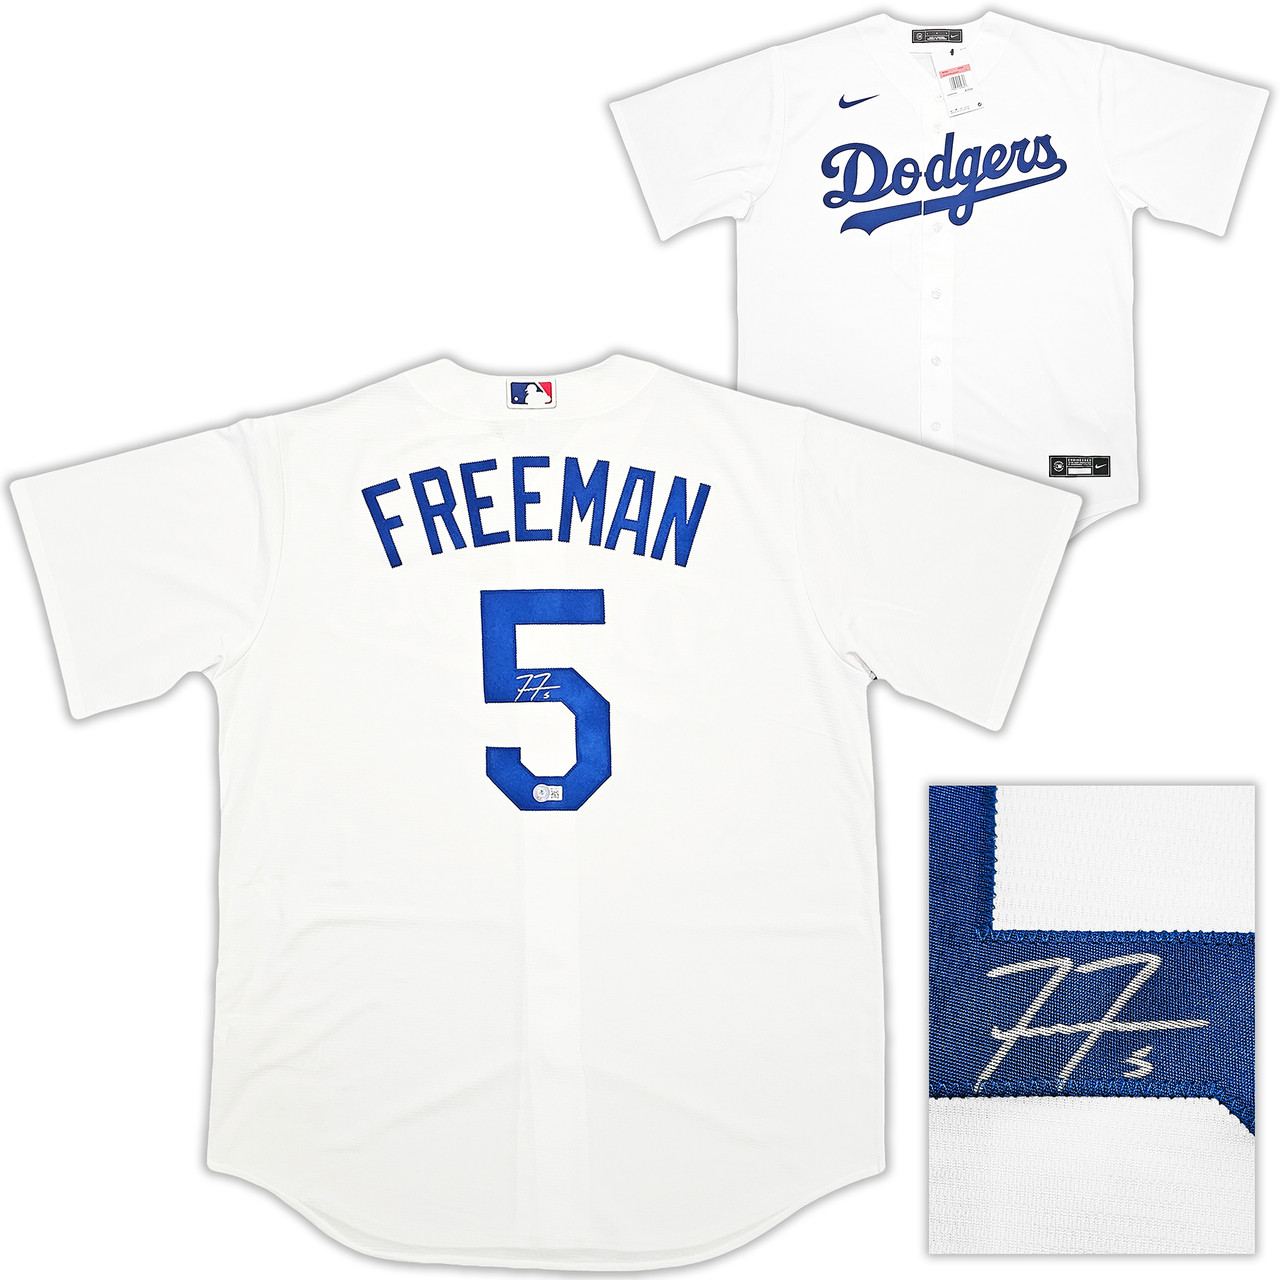 Clayton Kershaw Autographed Replica White Dodgers Jersey